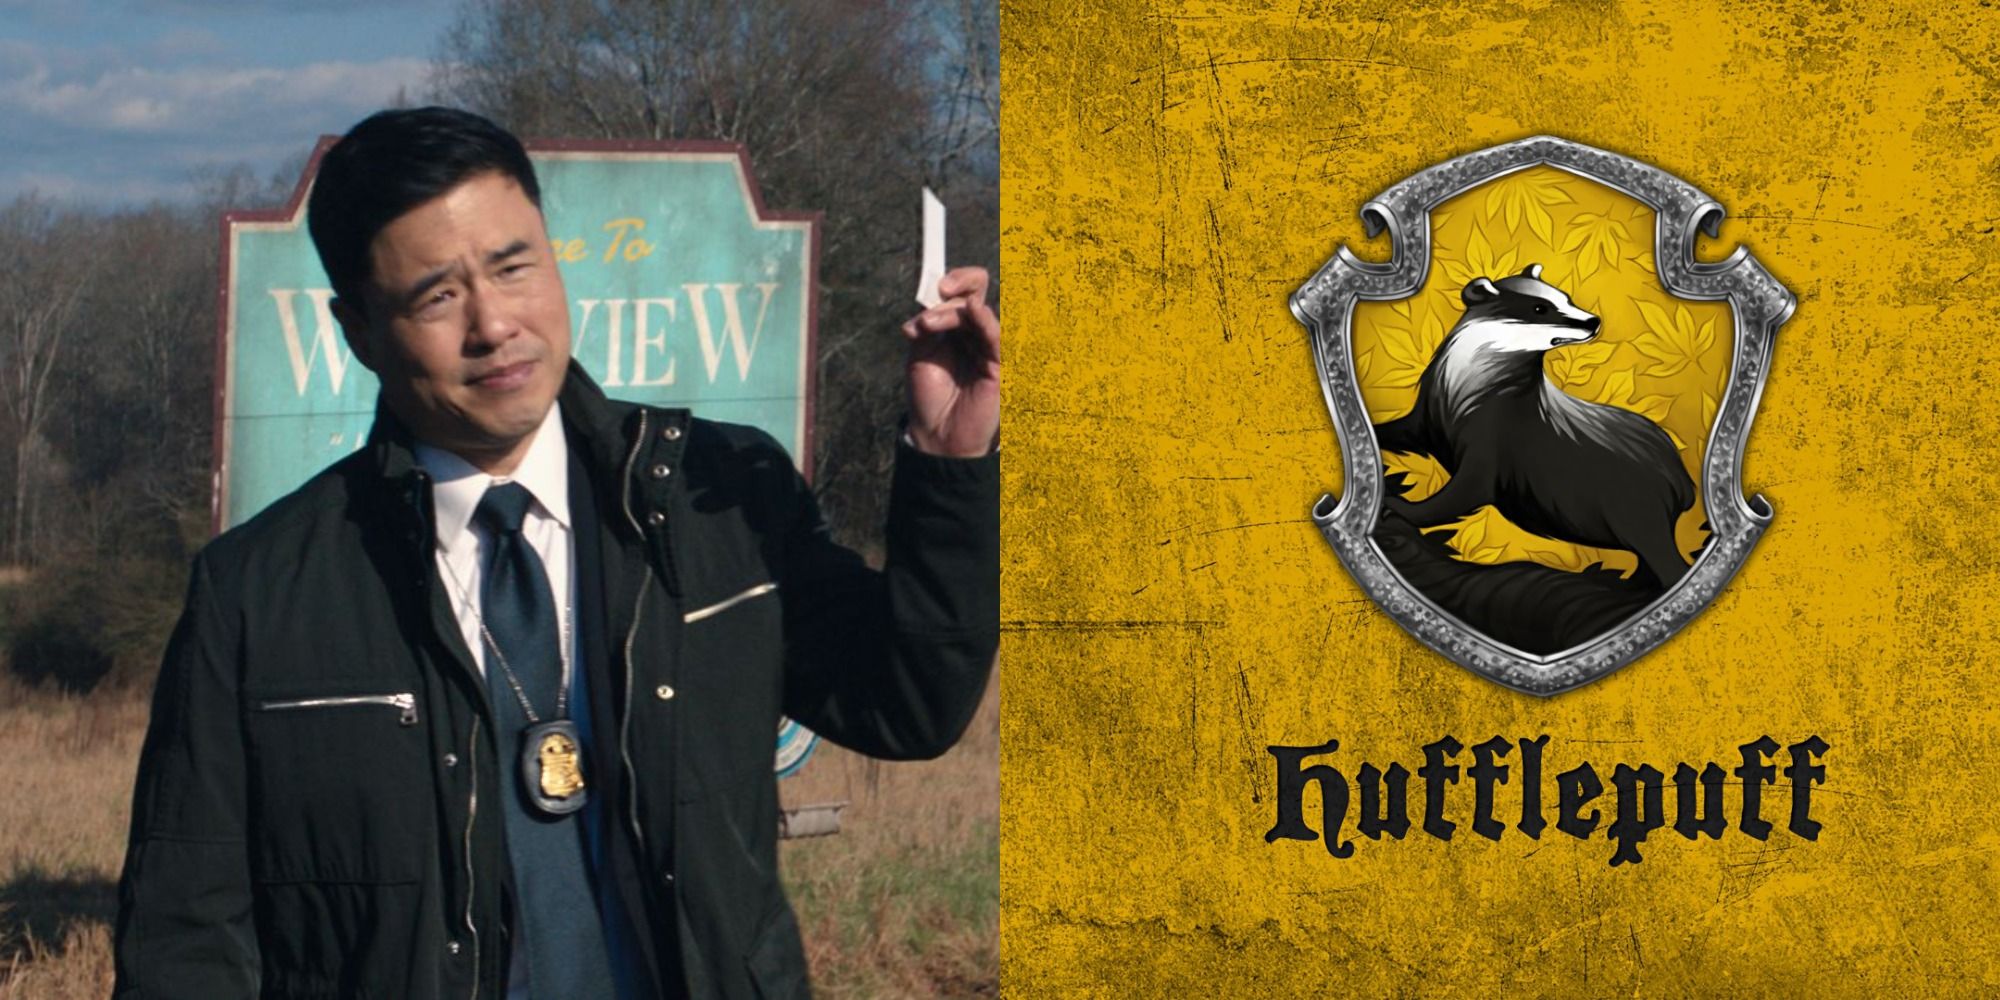 A split image of Jimmy holding a ticket and the Hufflepuff logo